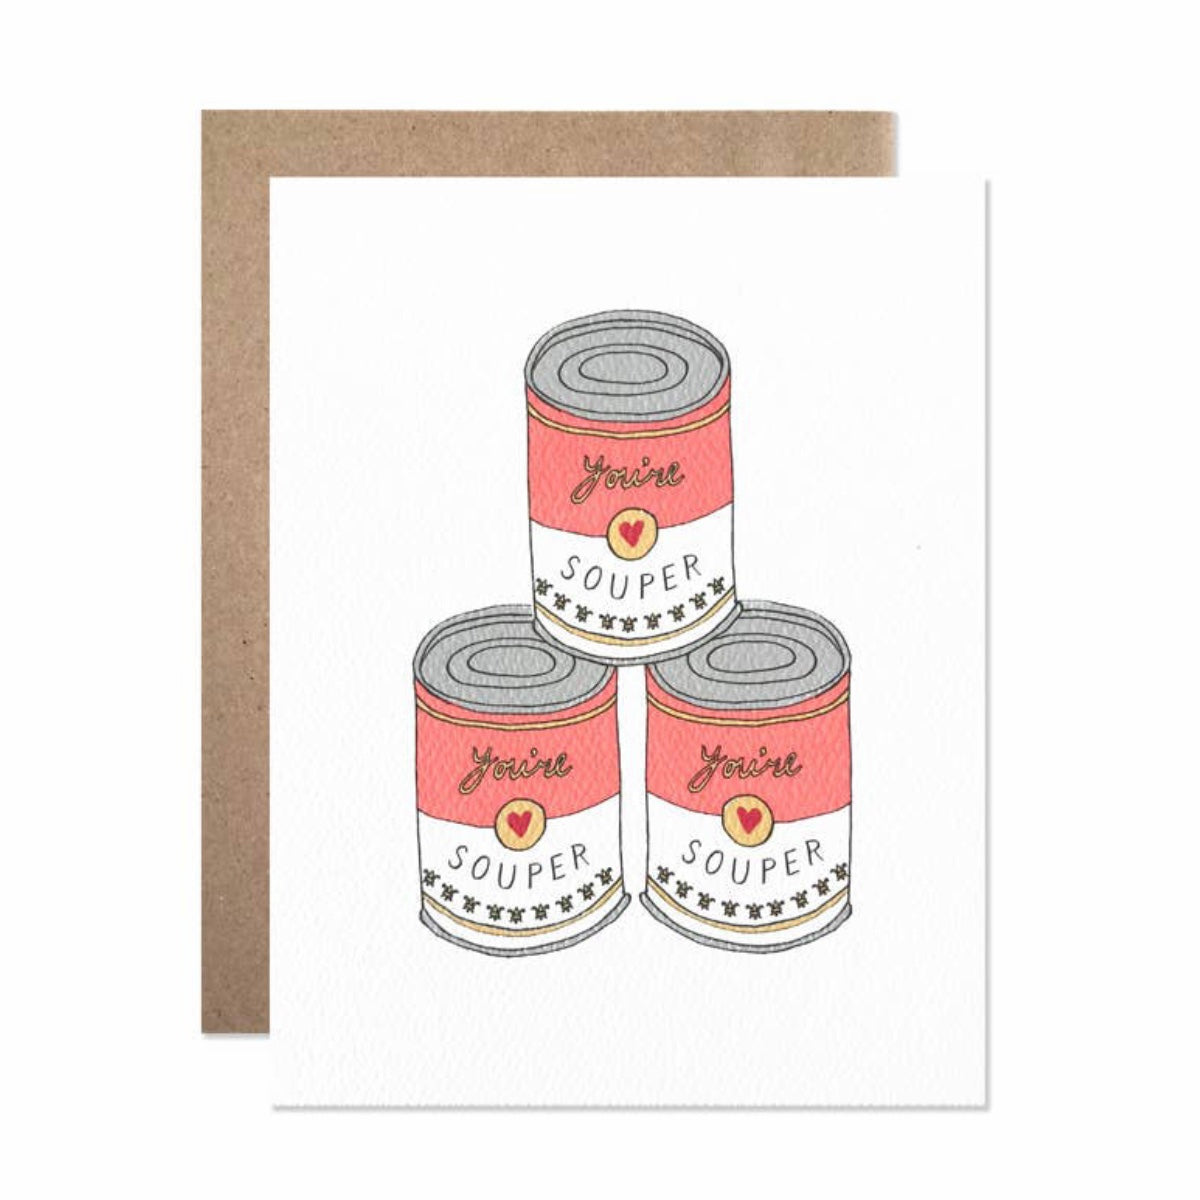 You're souper greeting card